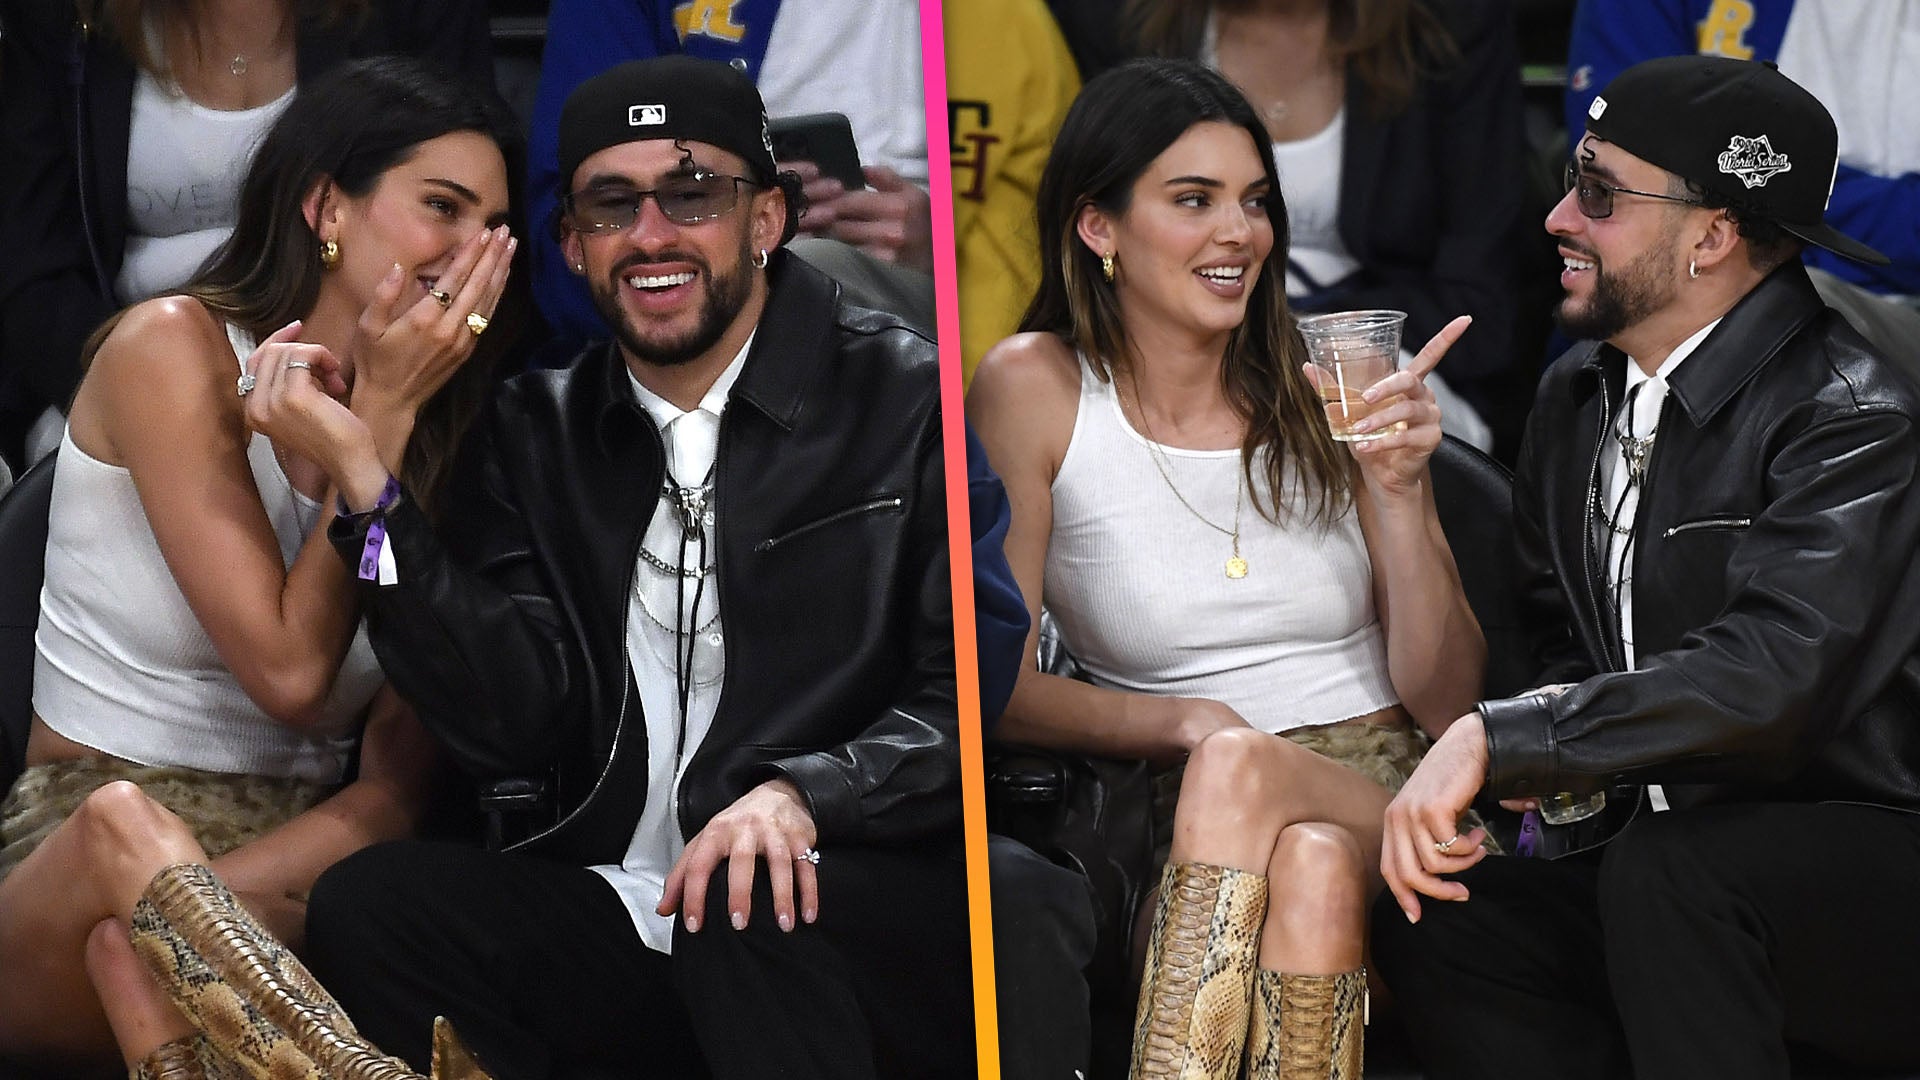 Kendall Jenner and Bad Bunny Attend Lakers Game Together